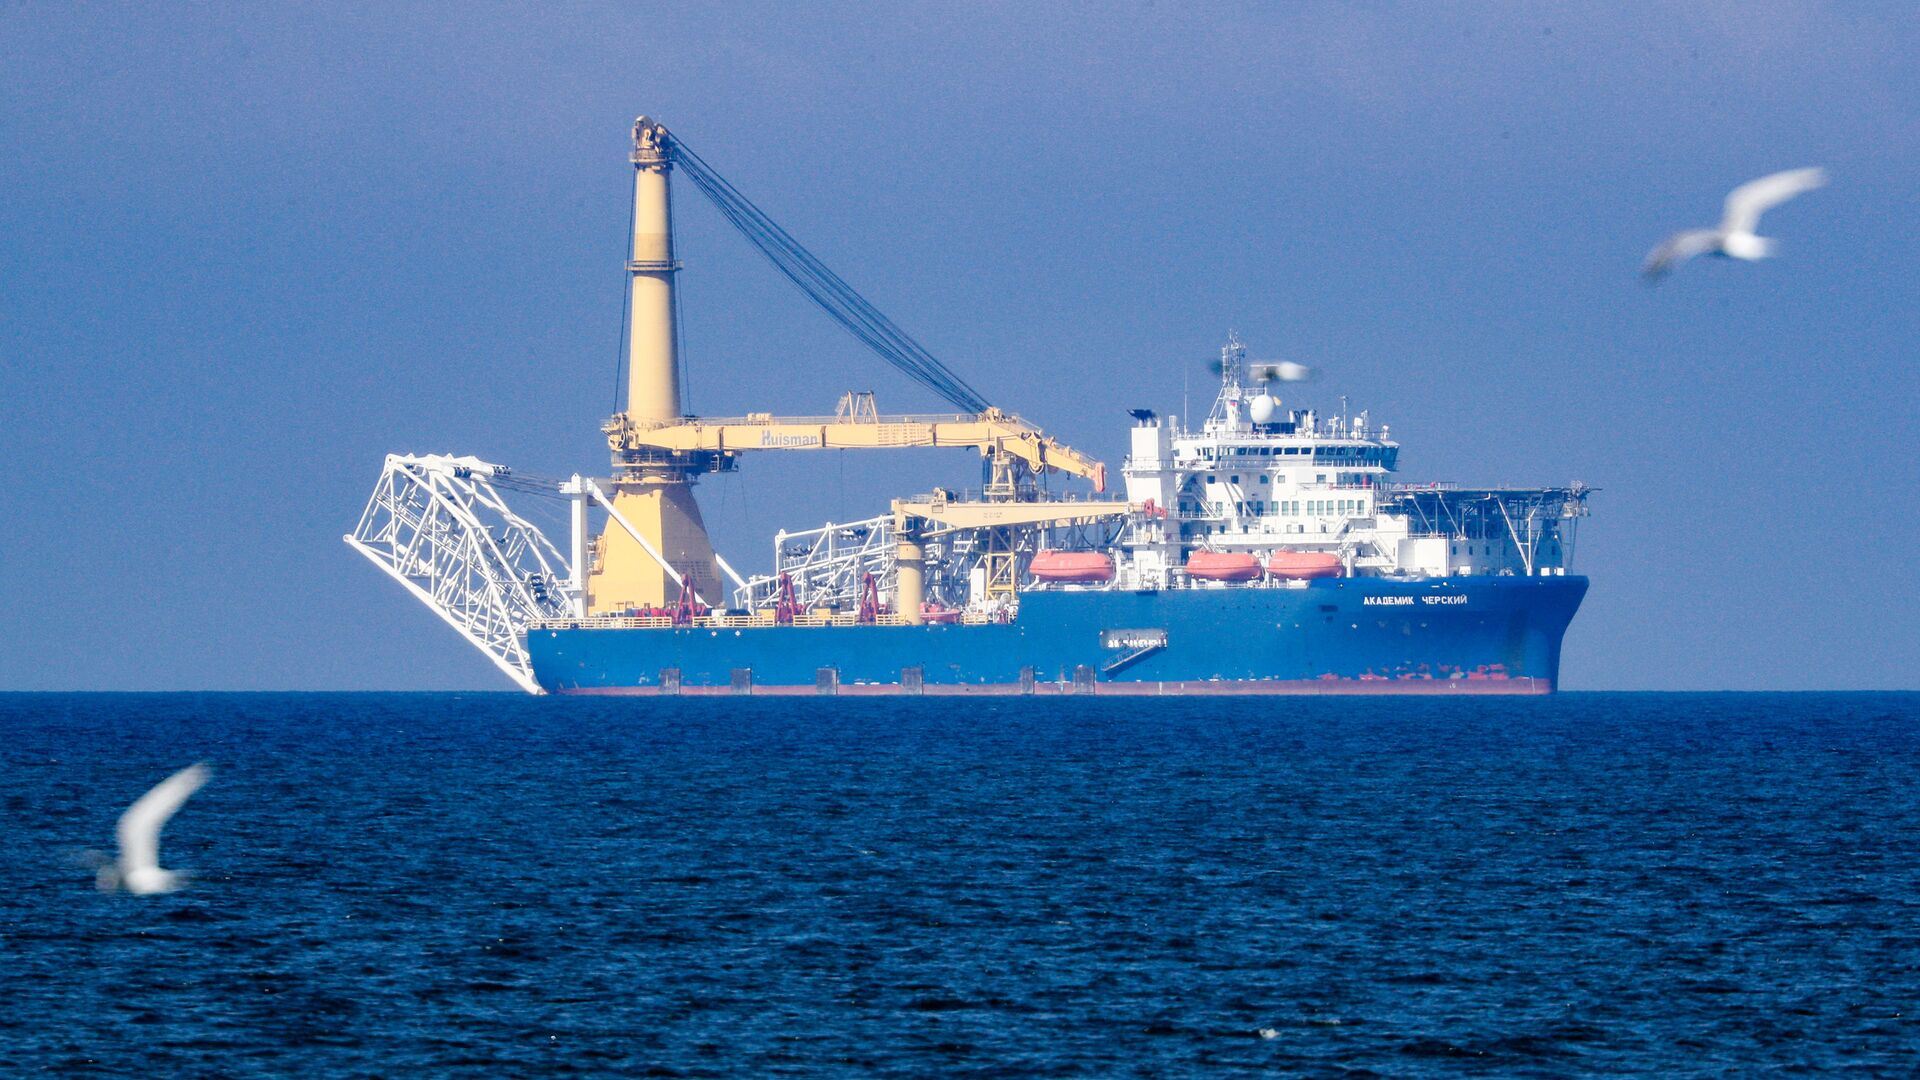 The Russian pipe layer vessel Akademik Cherskiy is pictured in the waters of Kaliningrad, Russia. Pipe-laying vessel Akademik Chersky is able to complete the construction of the Nord Stream 2 gas pipeline - Sputnik International, 1920, 03.07.2021